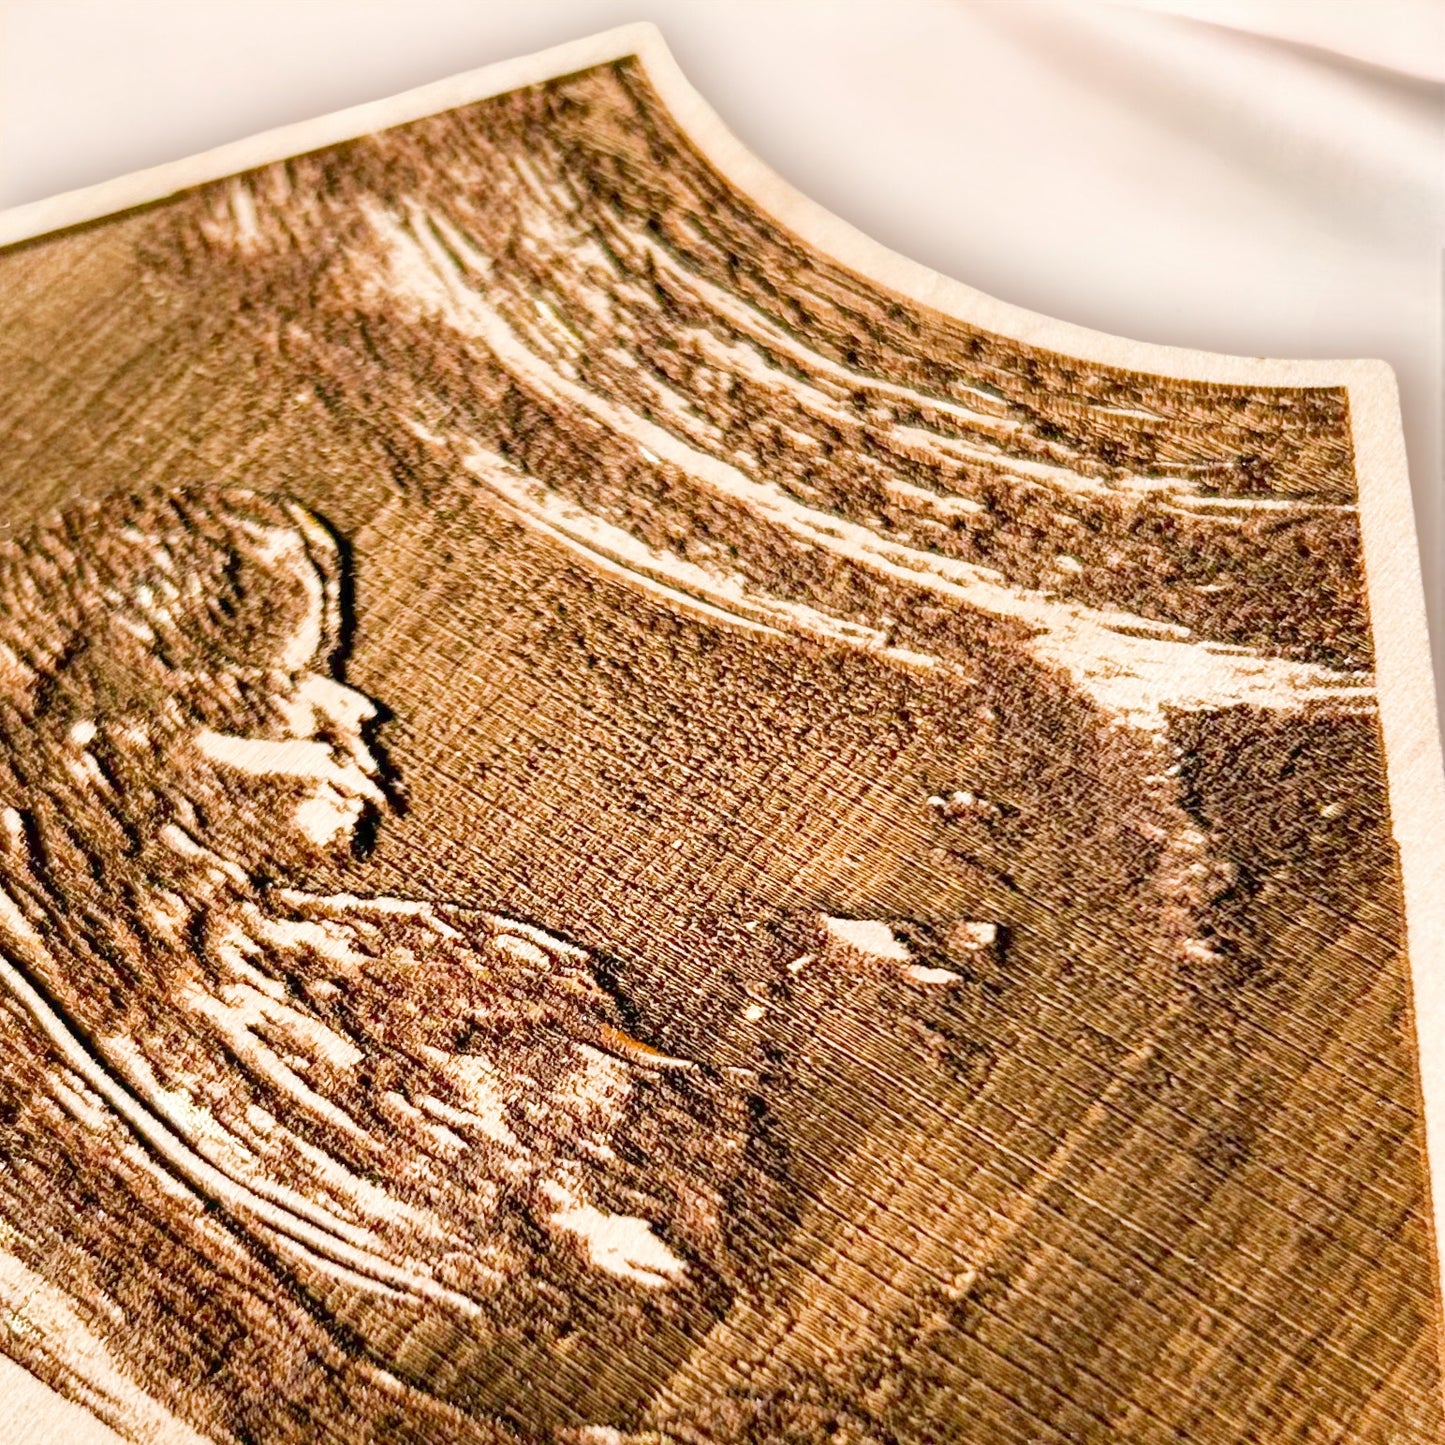 Engraved Baby Ultrasound